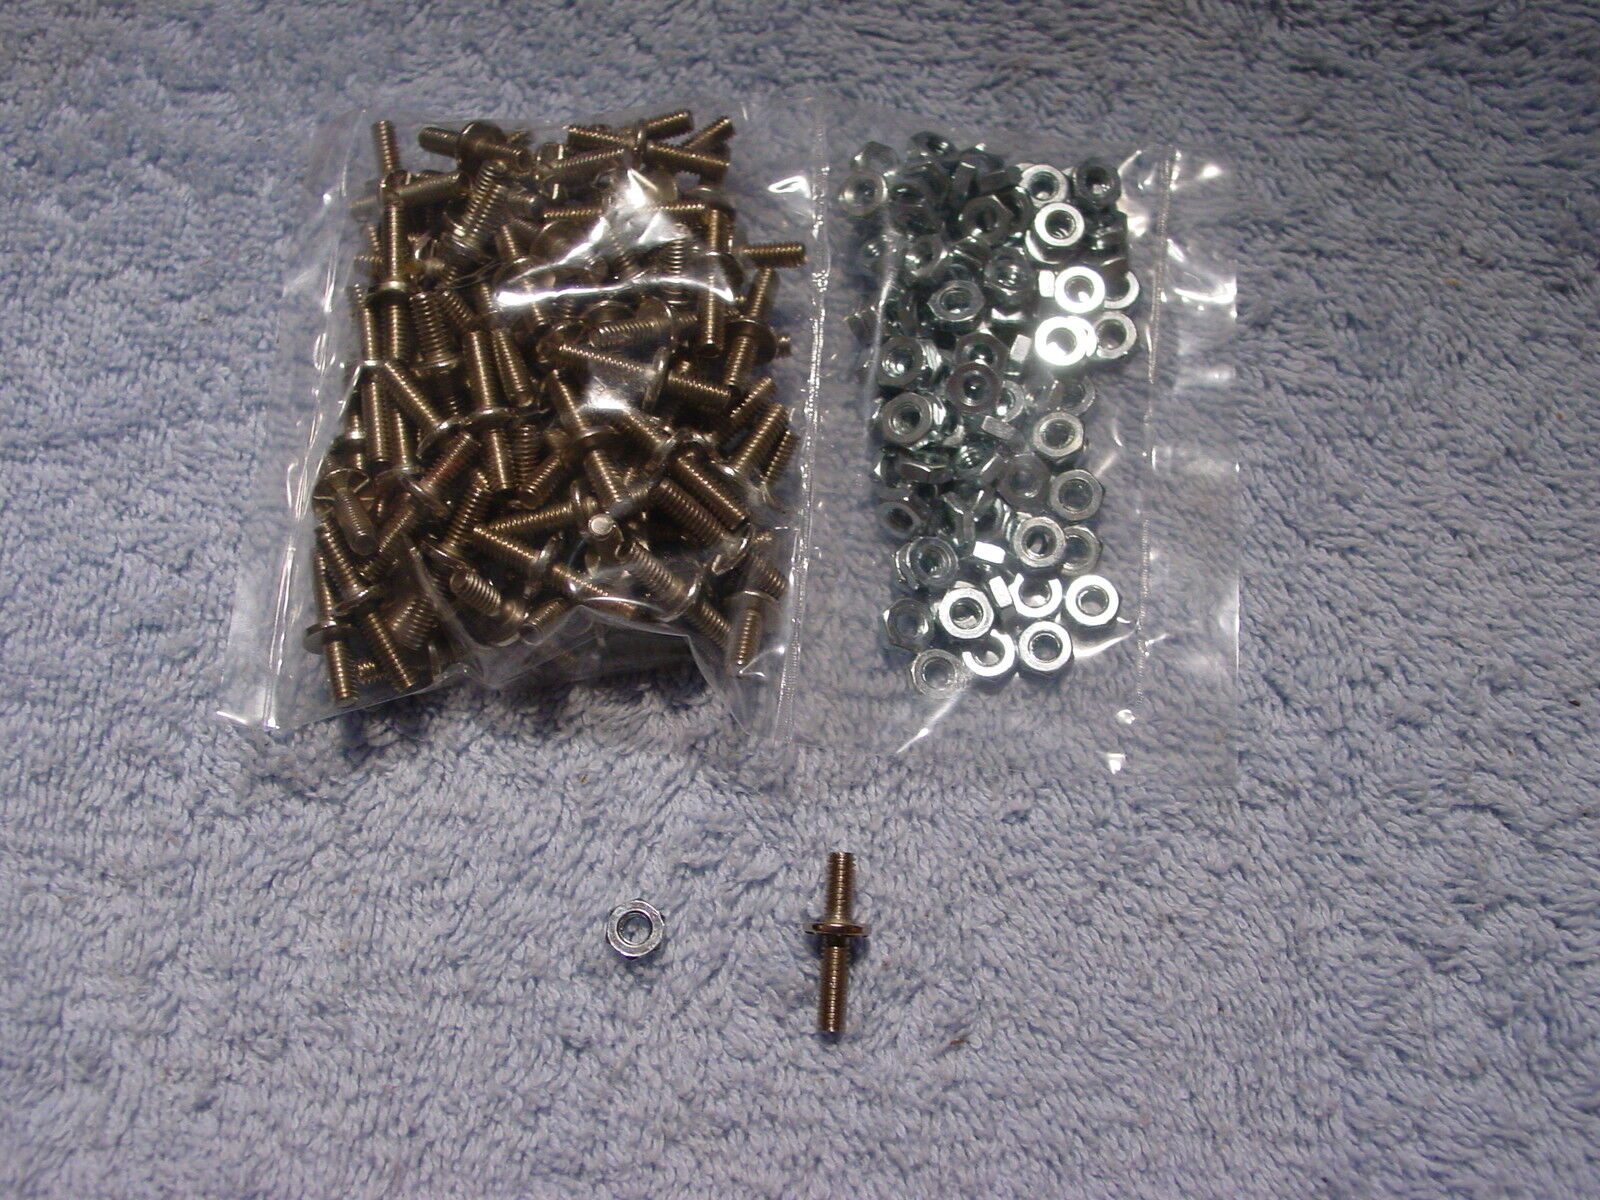 50 T-159 BINDING POST REPAIR KIT FOR LIONEL ZW,KW,TW,RW TRANSFORMERS